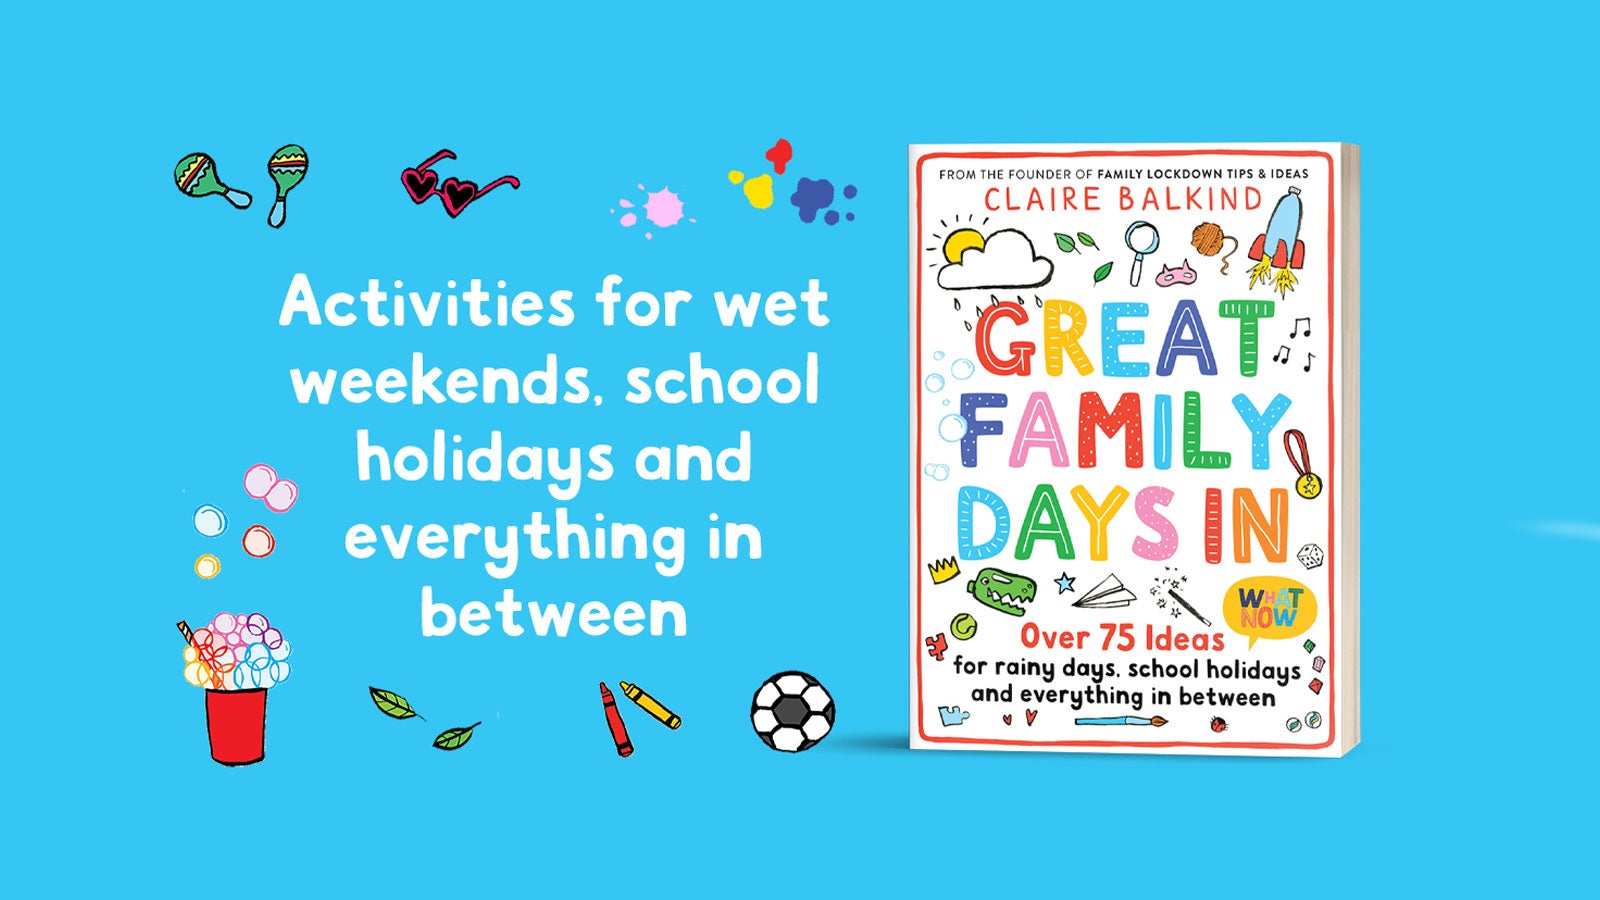 Great Family Days In book cover against a blue background